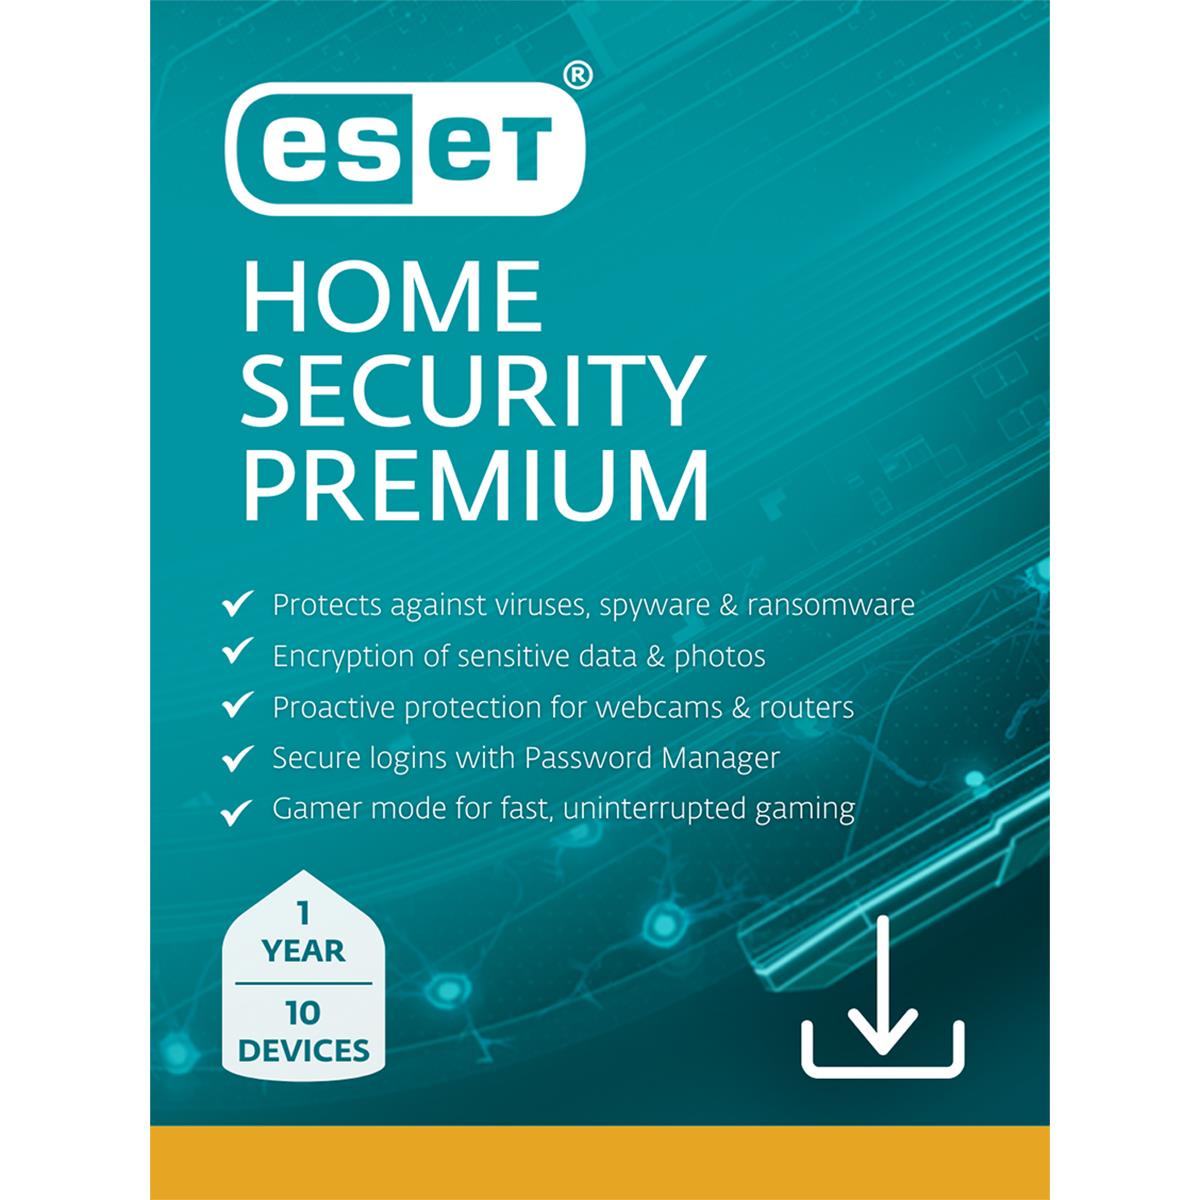 Image of ESET Premium 1 Year Home Security 10 Device